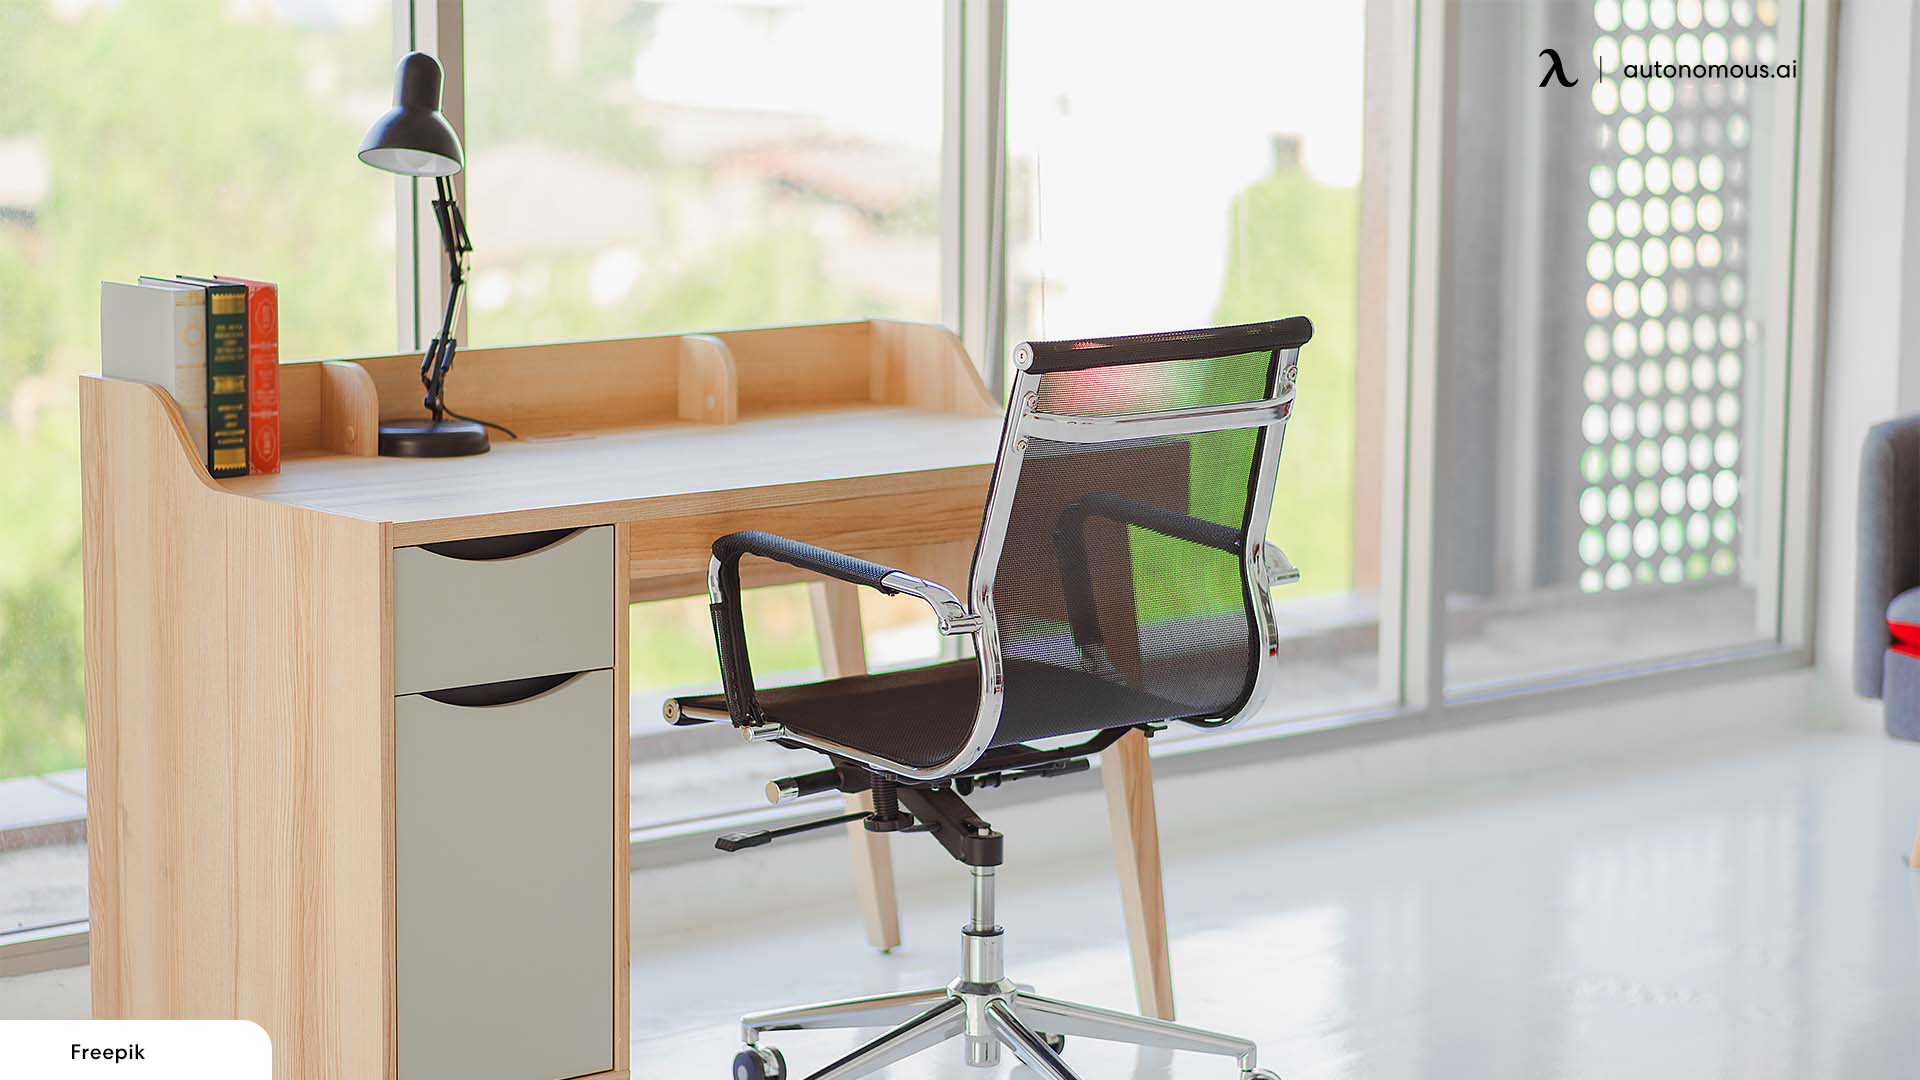 Cool Office Chair Ideas for 2022: 18 Stylish Designs for a Modern Office